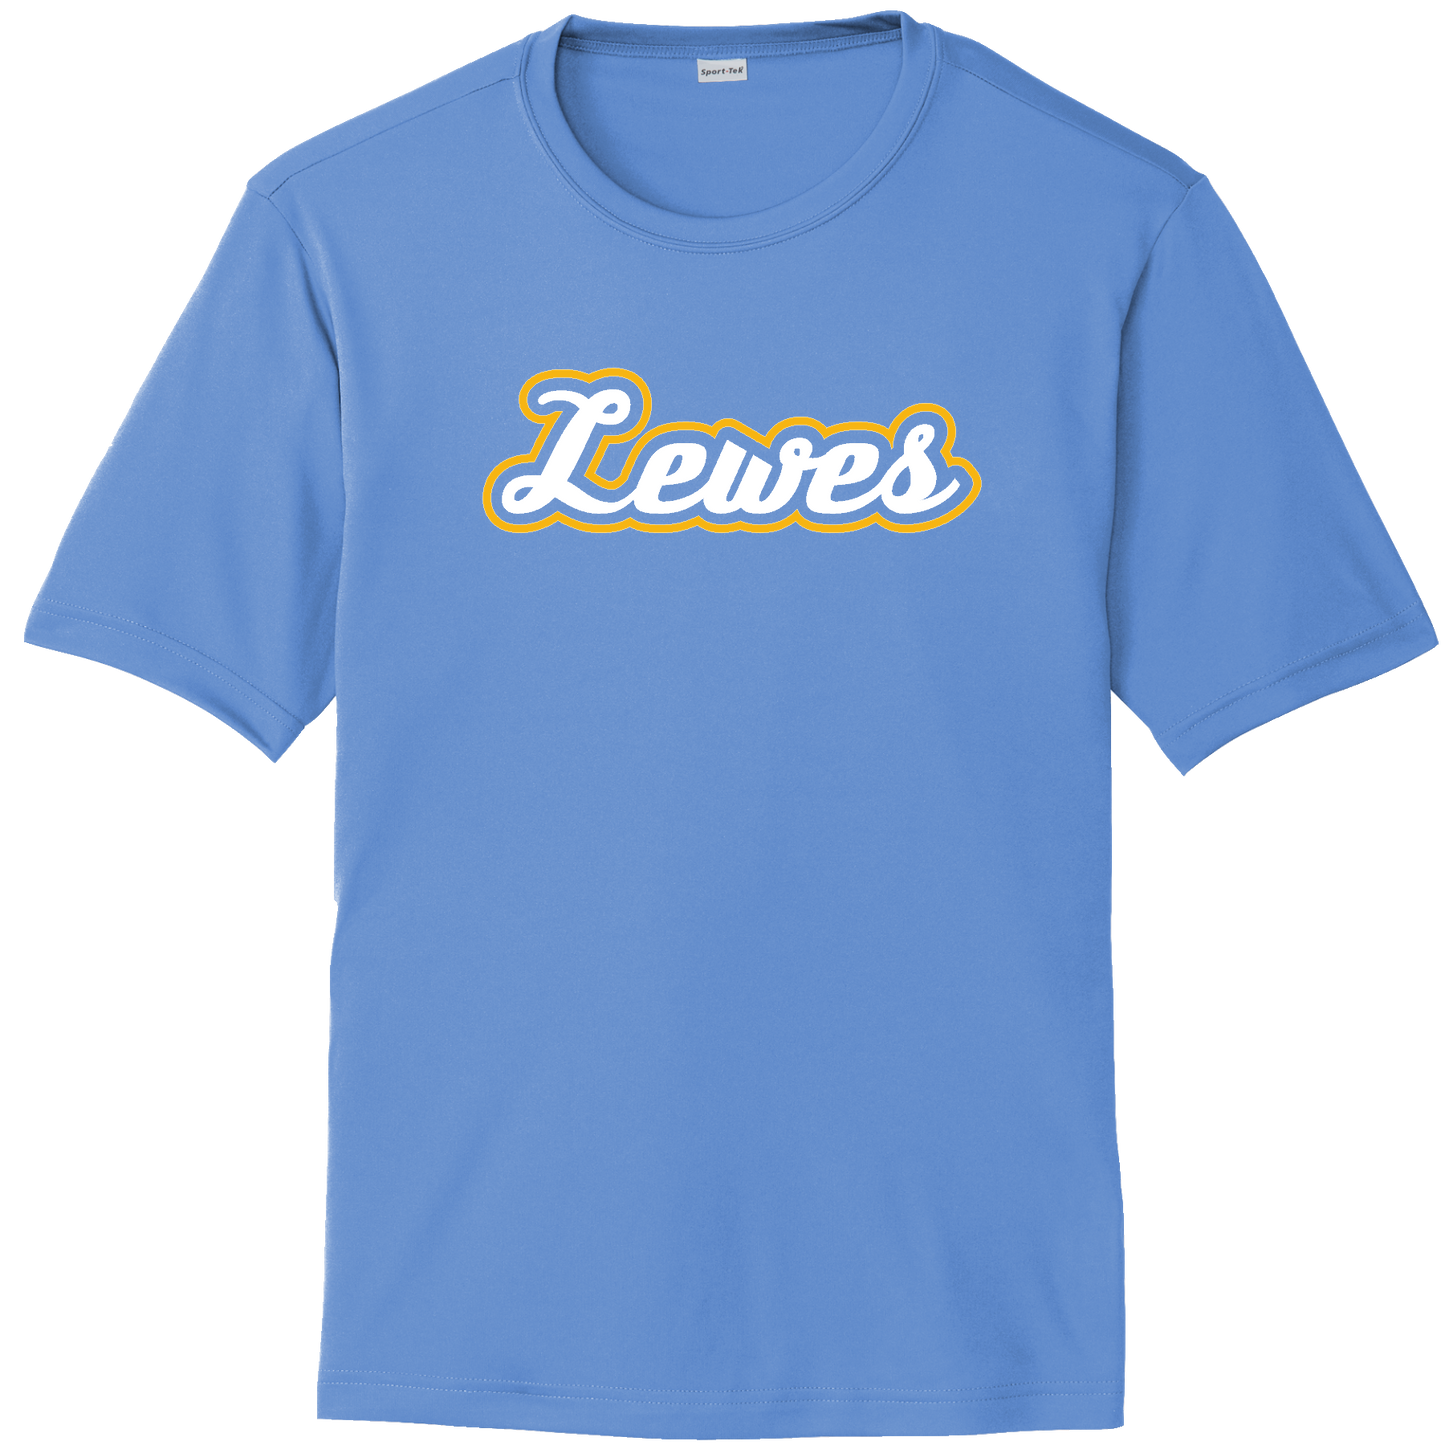 Youth Sport-Tek Polyester Competitor Tee (LEWES)